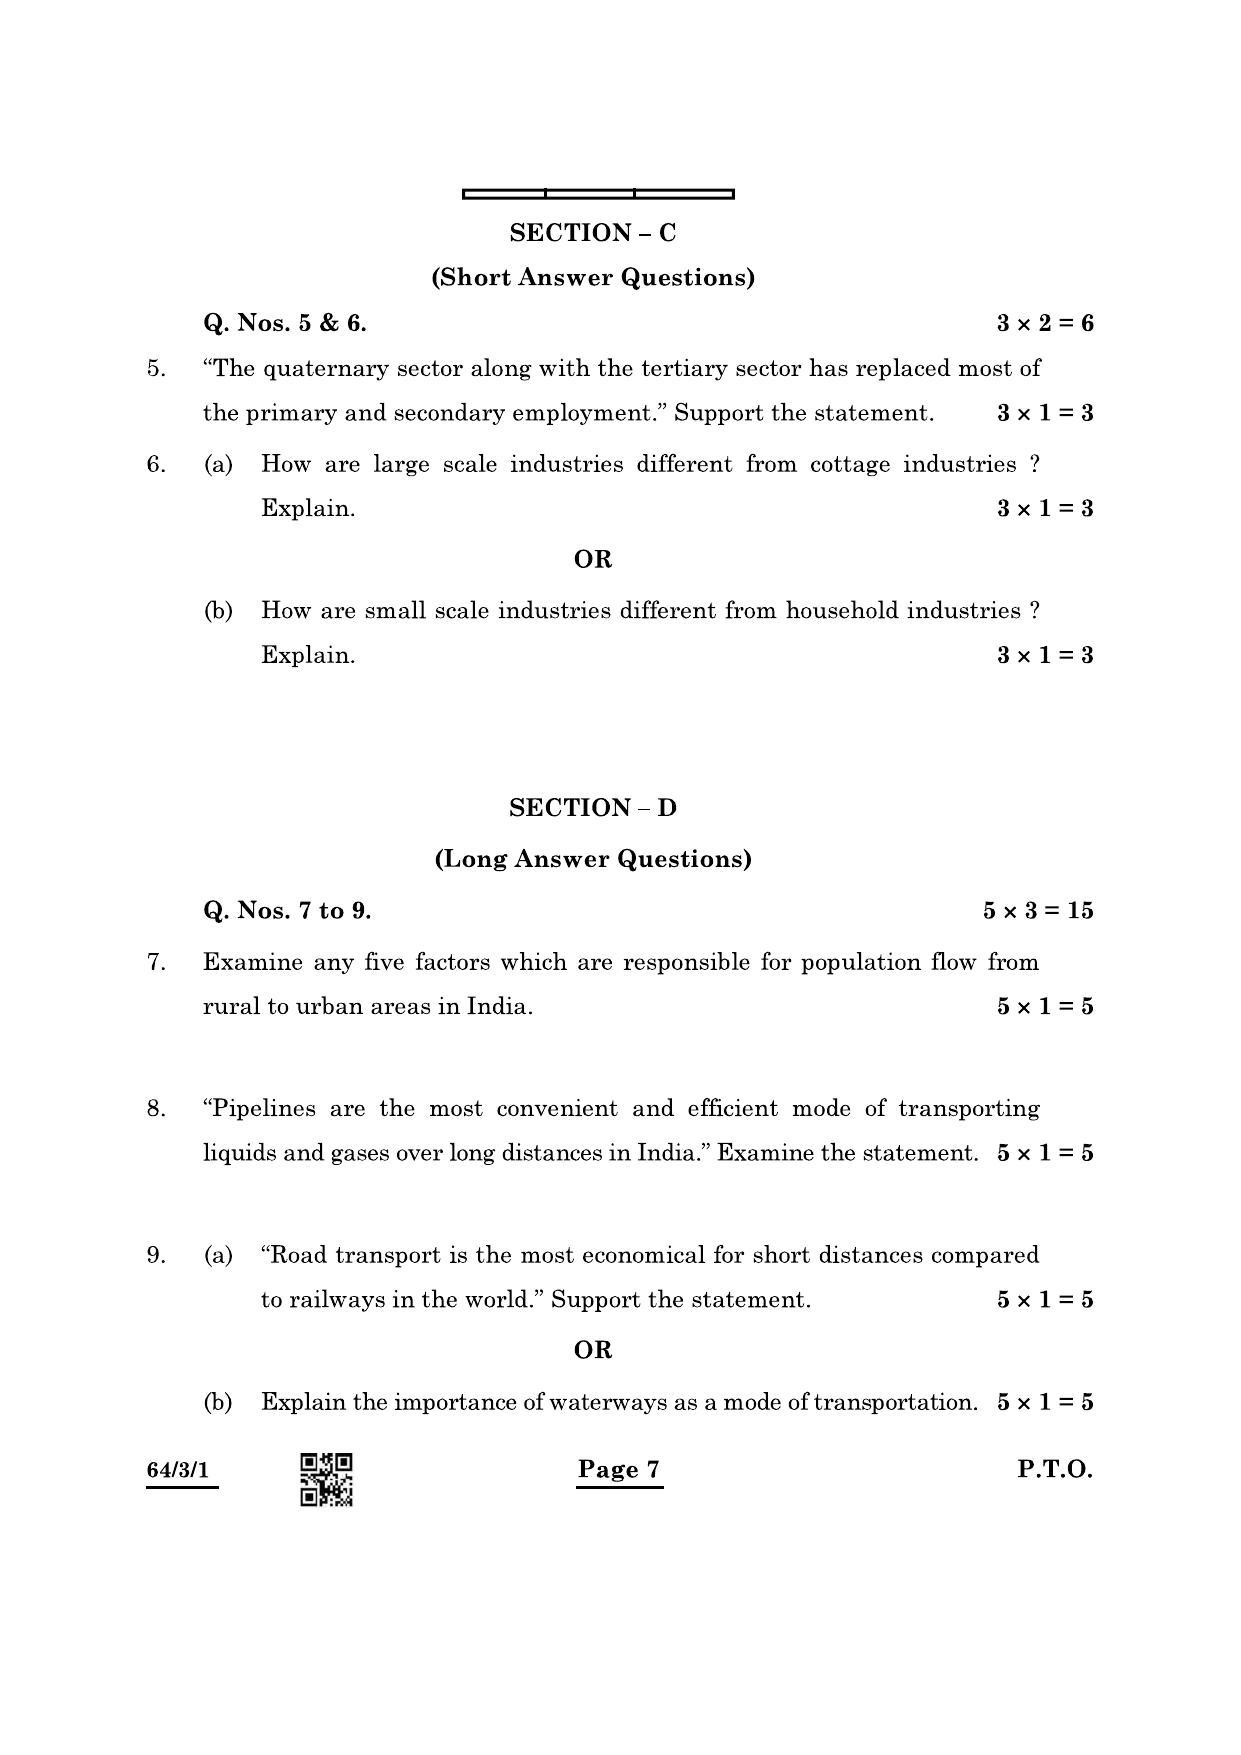 CBSE Class 12 64-3-1 Geography 2022 Question Paper - Page 7